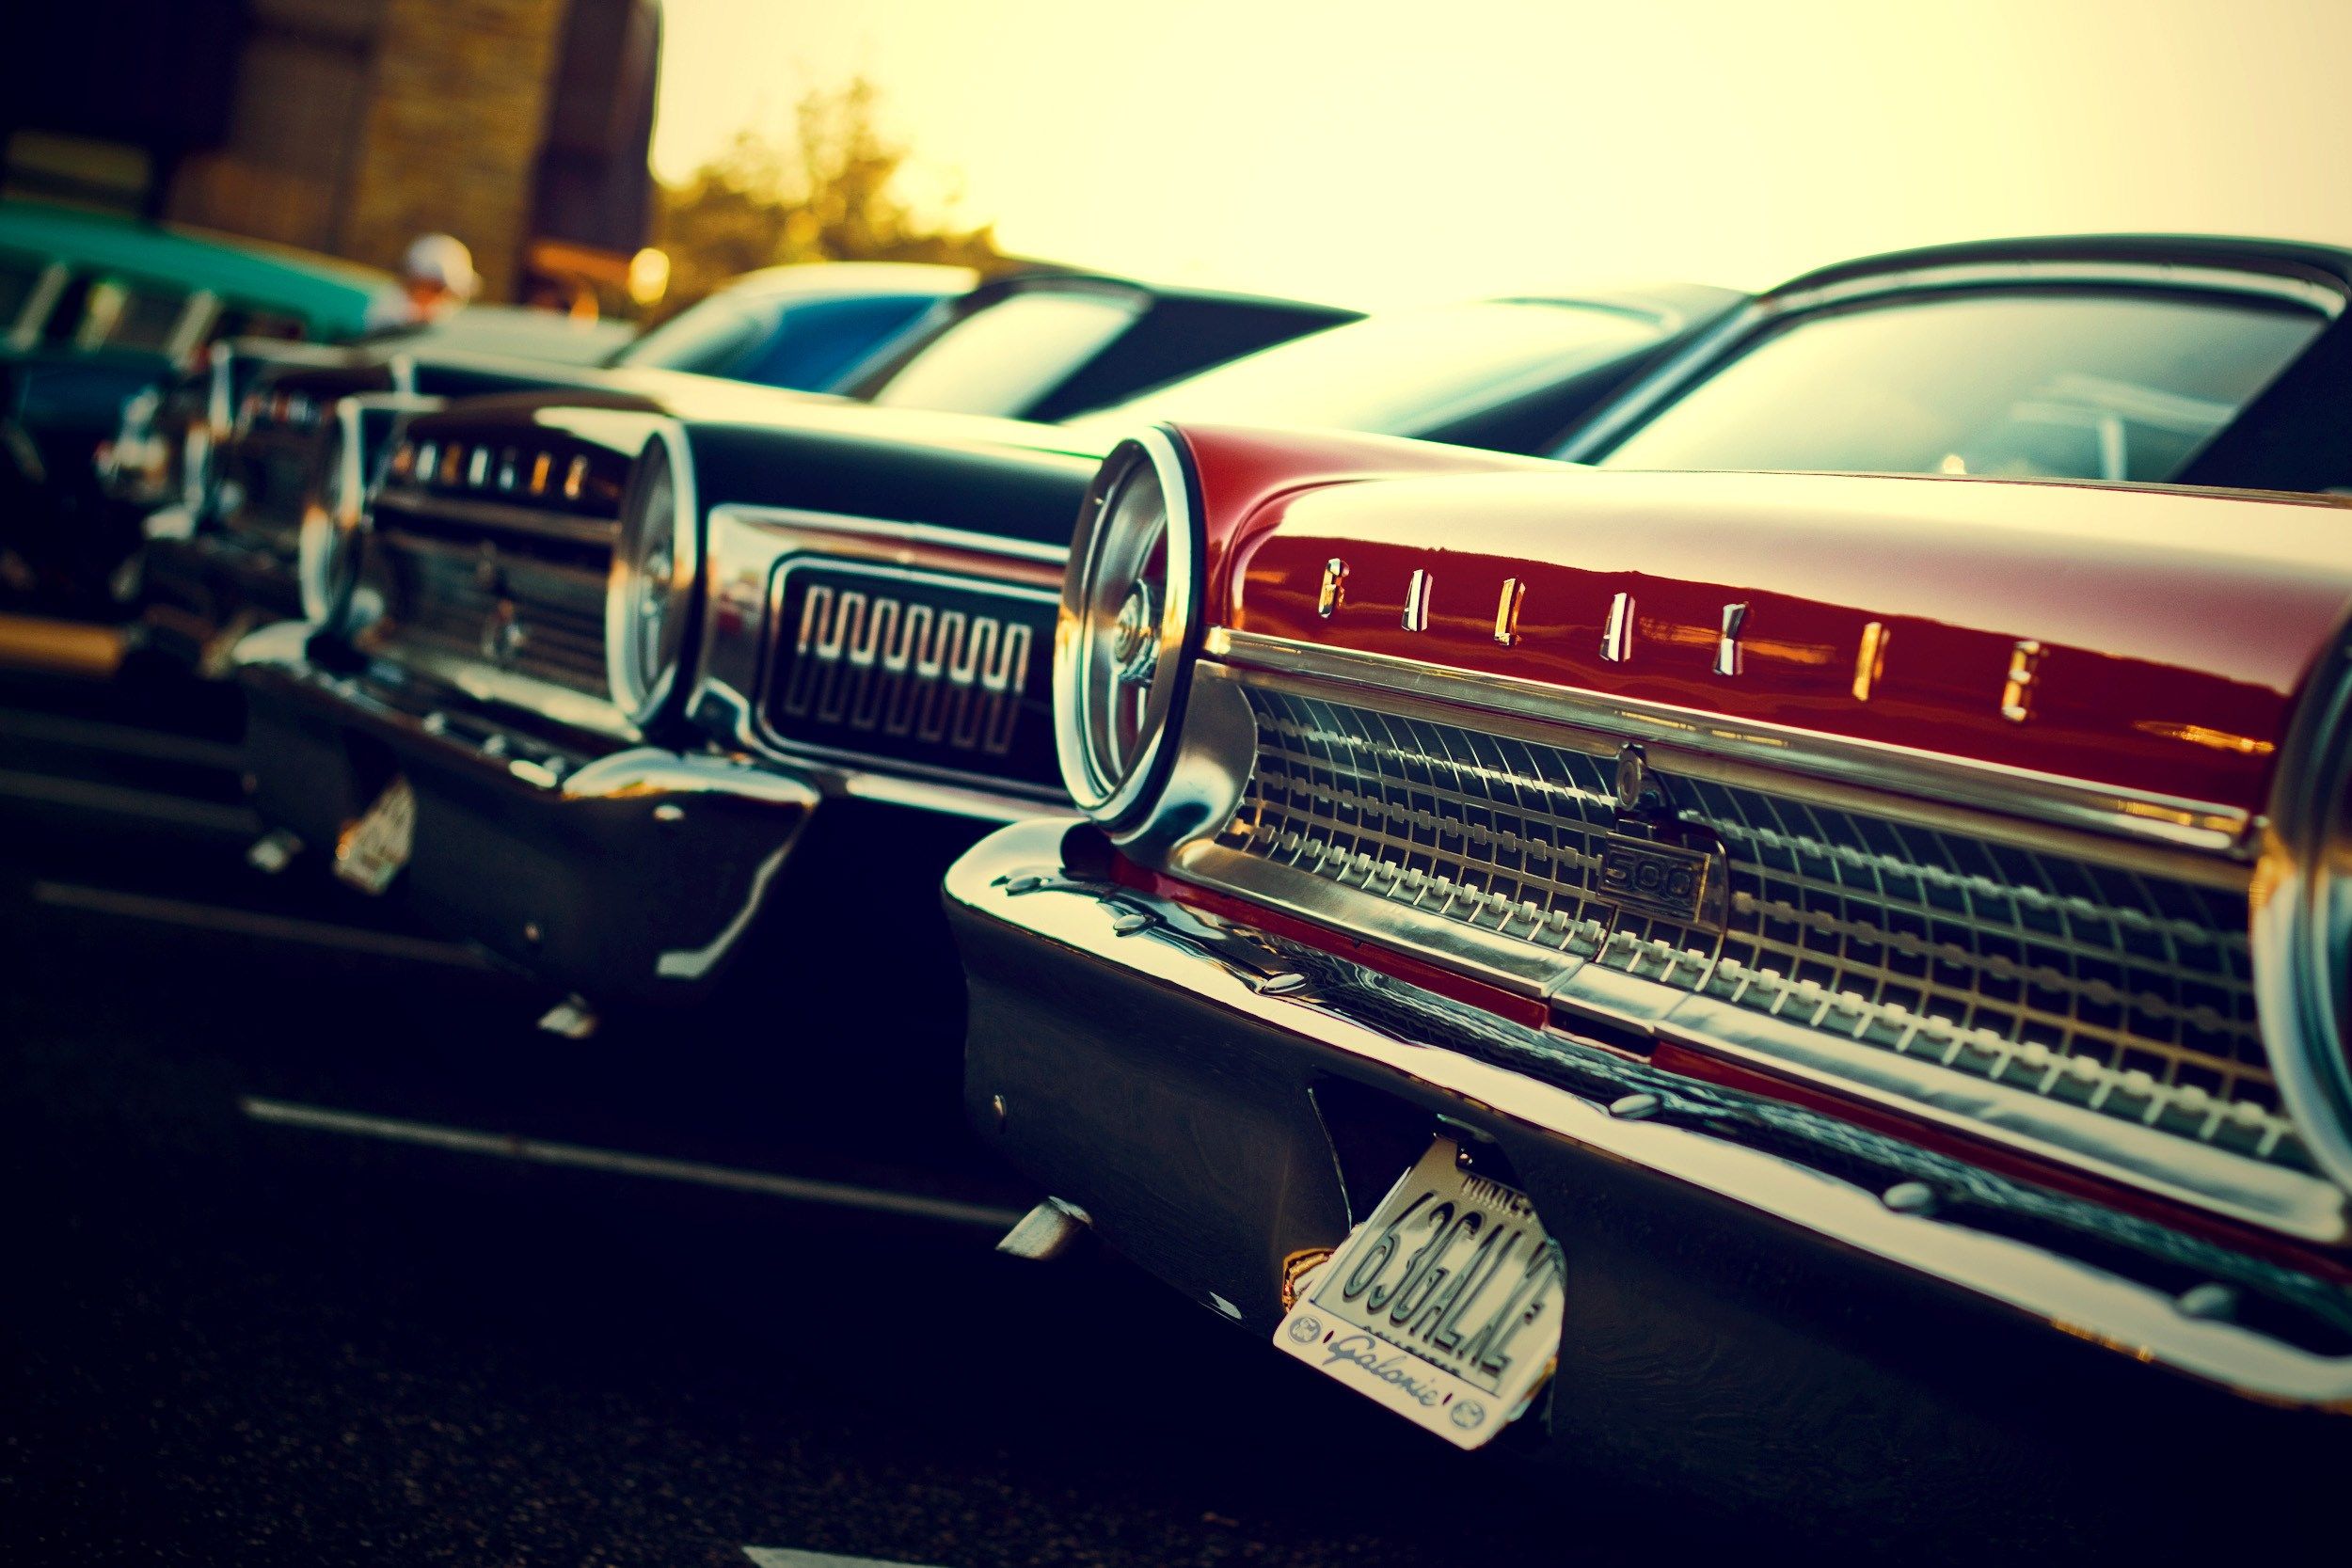 HD Widescreen Wallpaper Ford Galaxie Backround